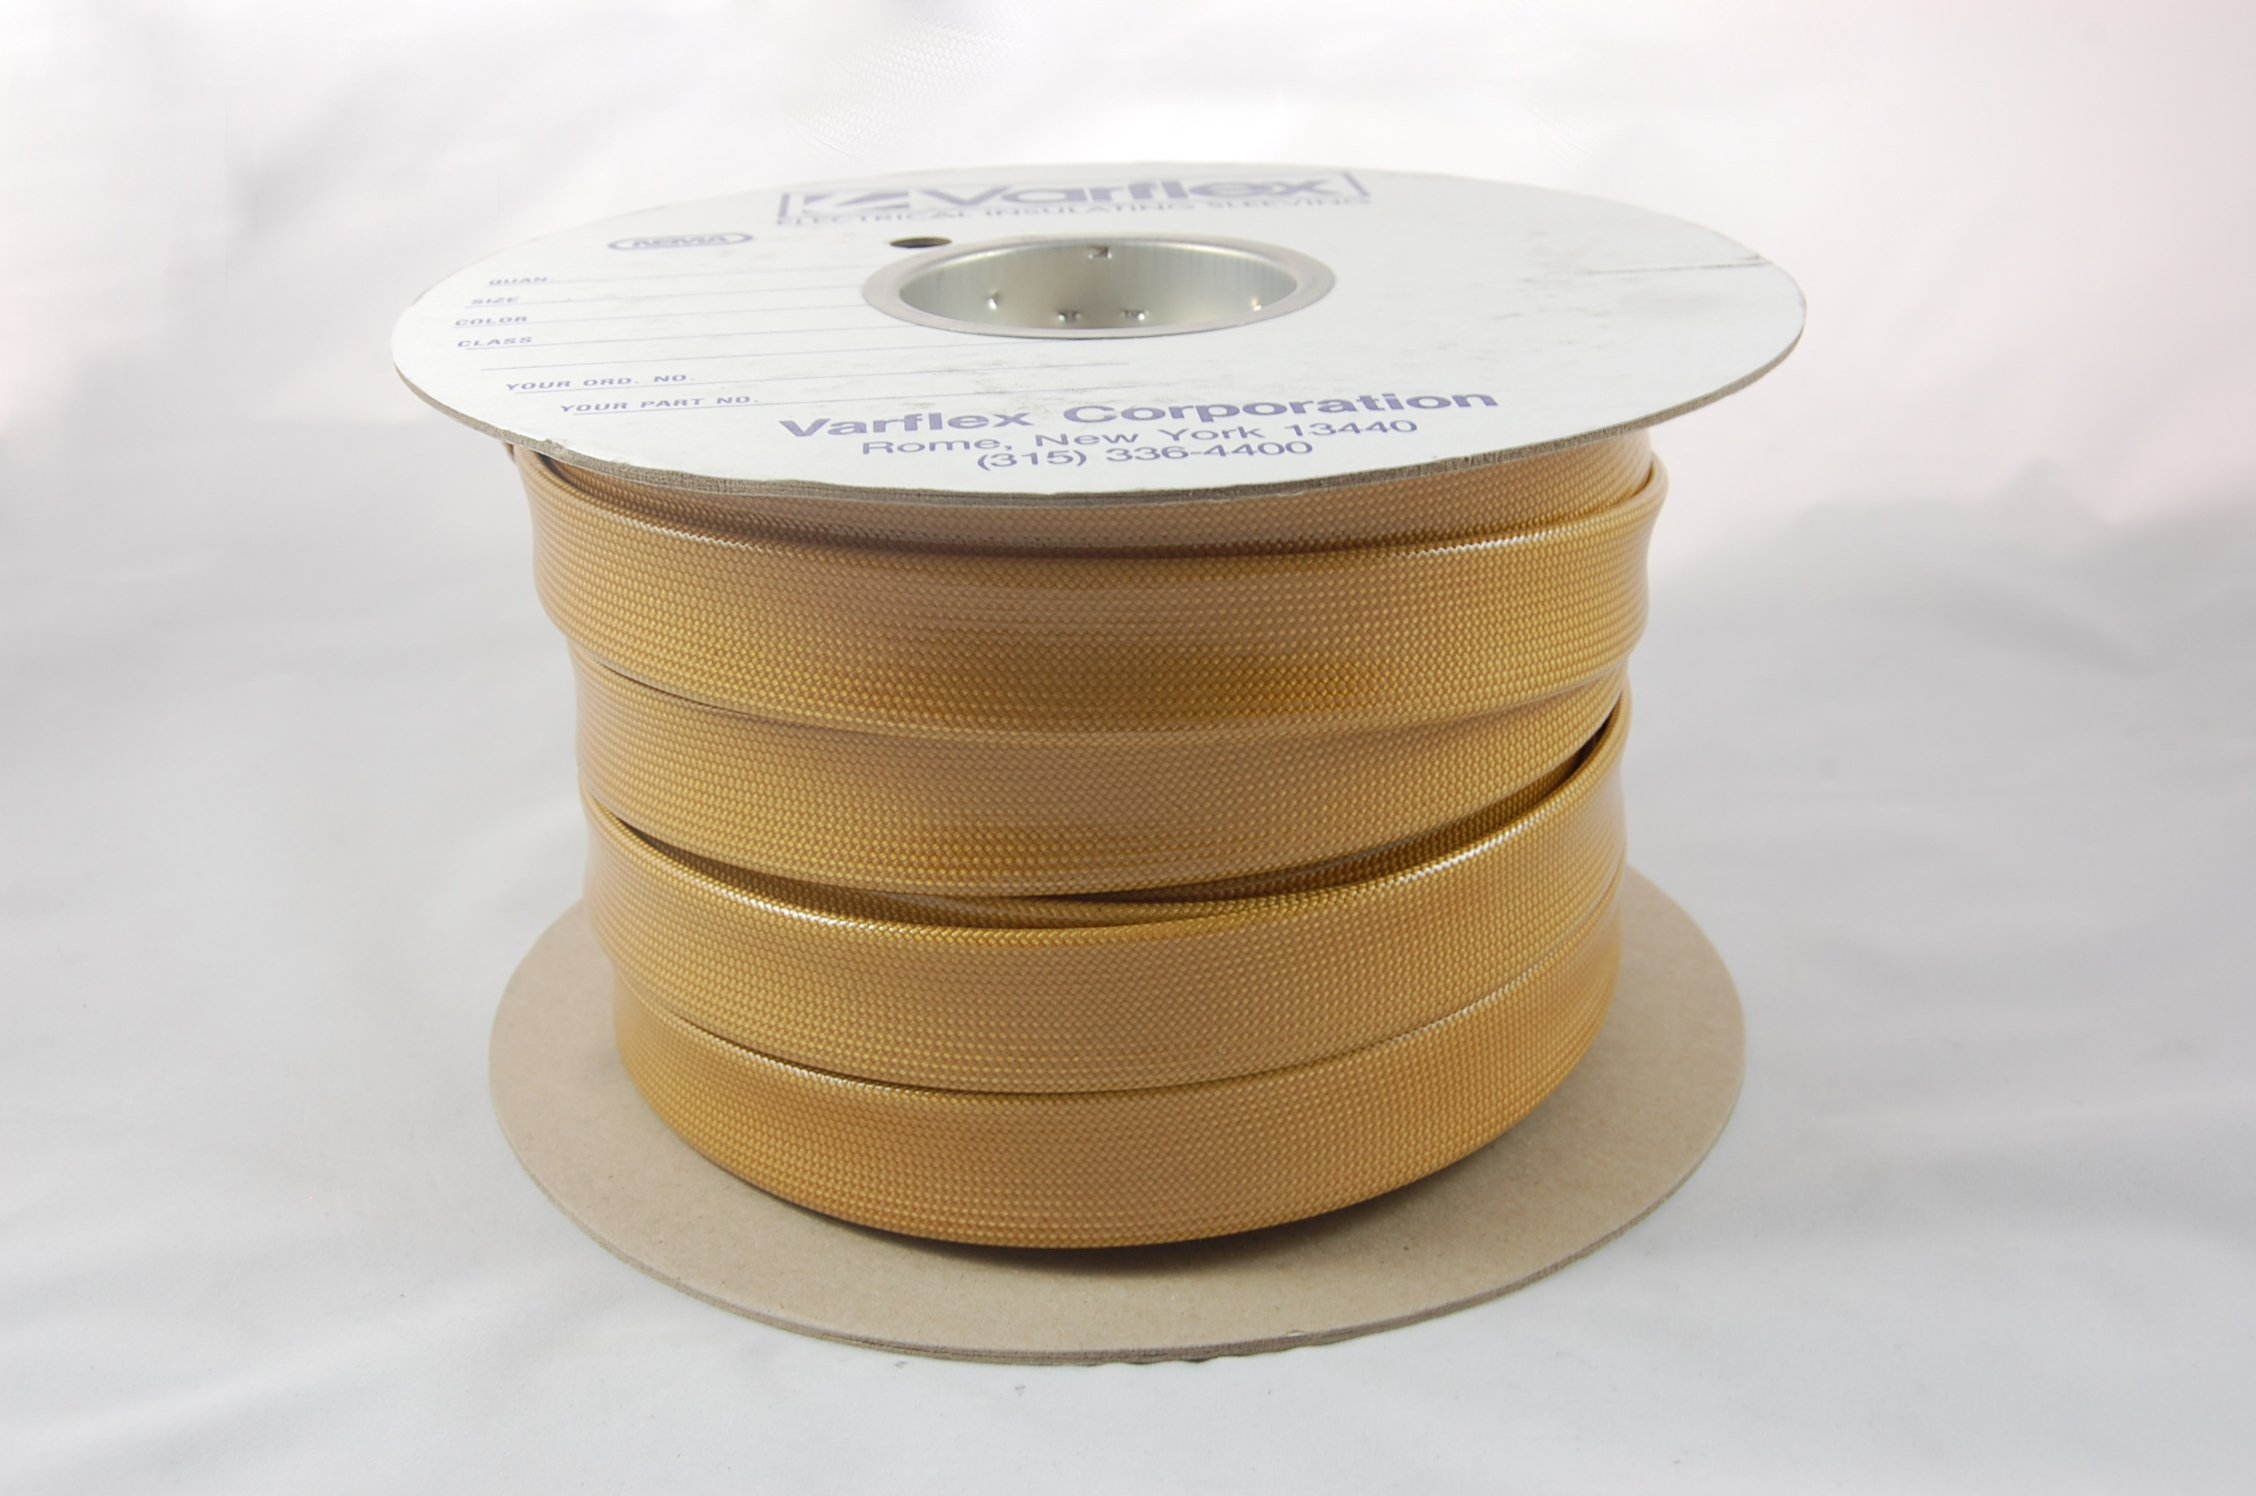 #15 AWG Varglas Silicone Resin 500 Grade H-A-1 (8000V) High Temperature Silicone Resin Coated Braided Fiberglass Sleeving 200°C, natural, 500 FT per spool